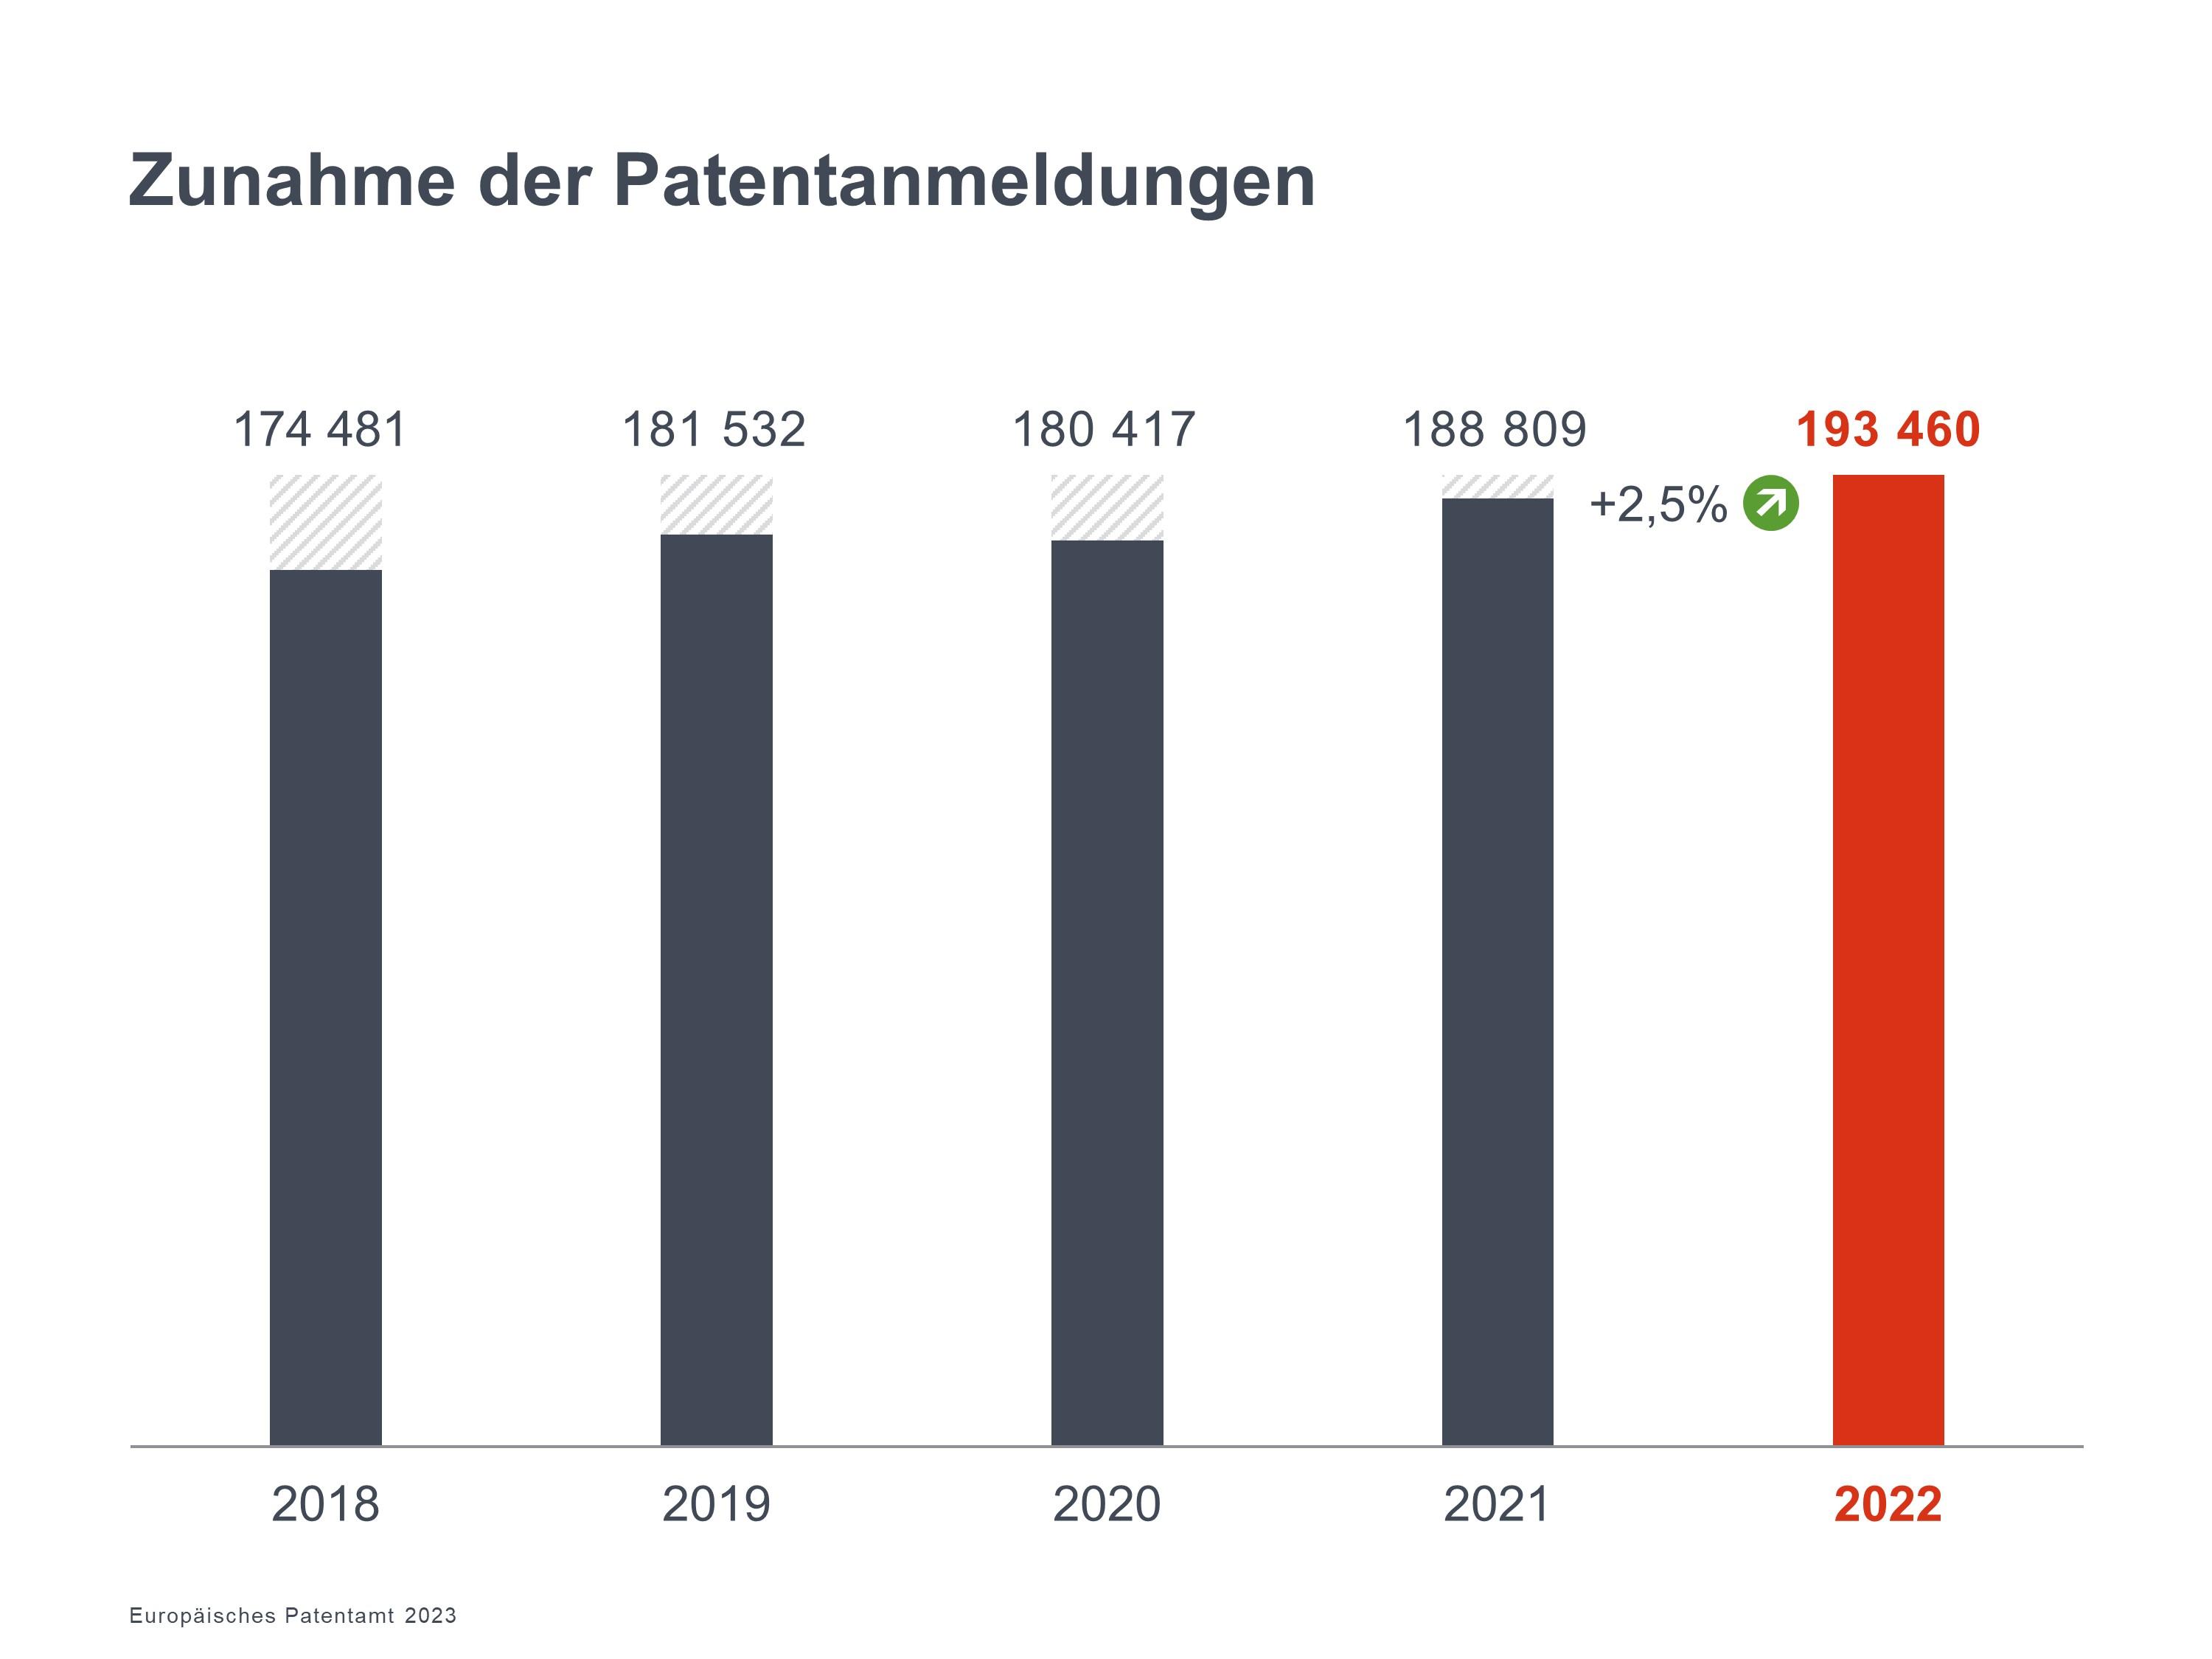 Growth of patent applications from 2018 until 2022. Year 2022 showing 193460 applications and a rais of 2.5 percent from 2021.